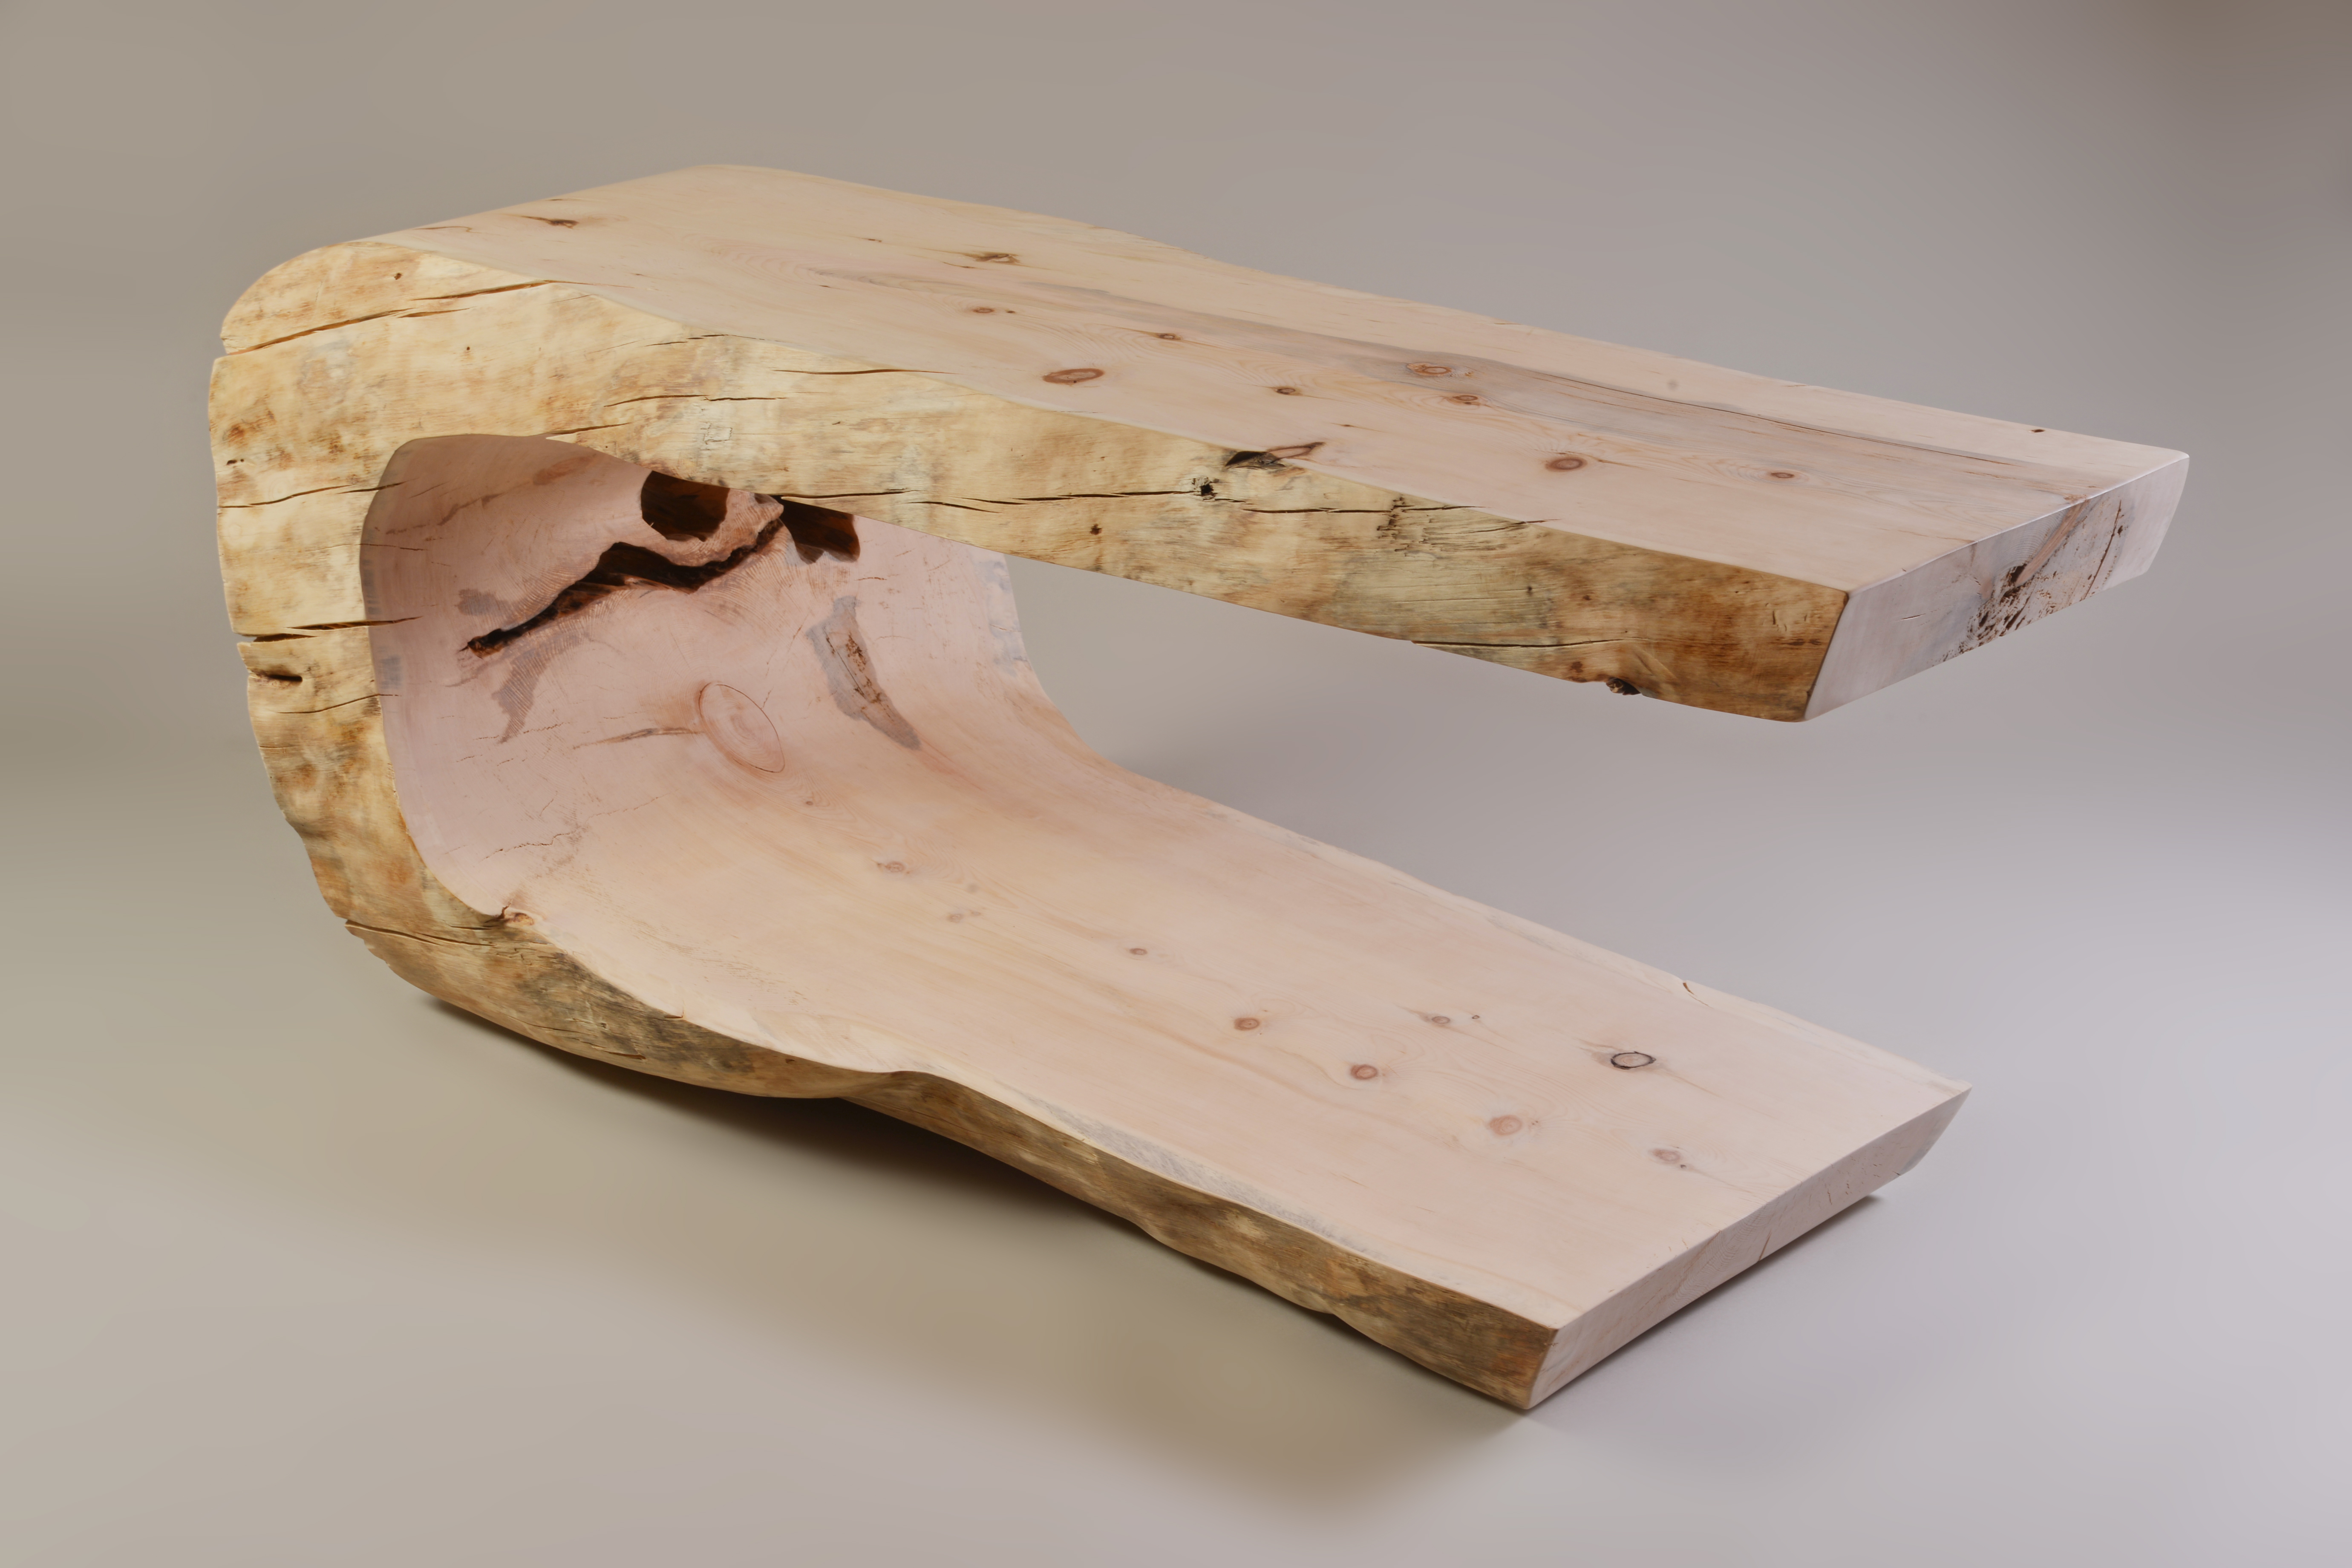 Designer side table from a tree trunk